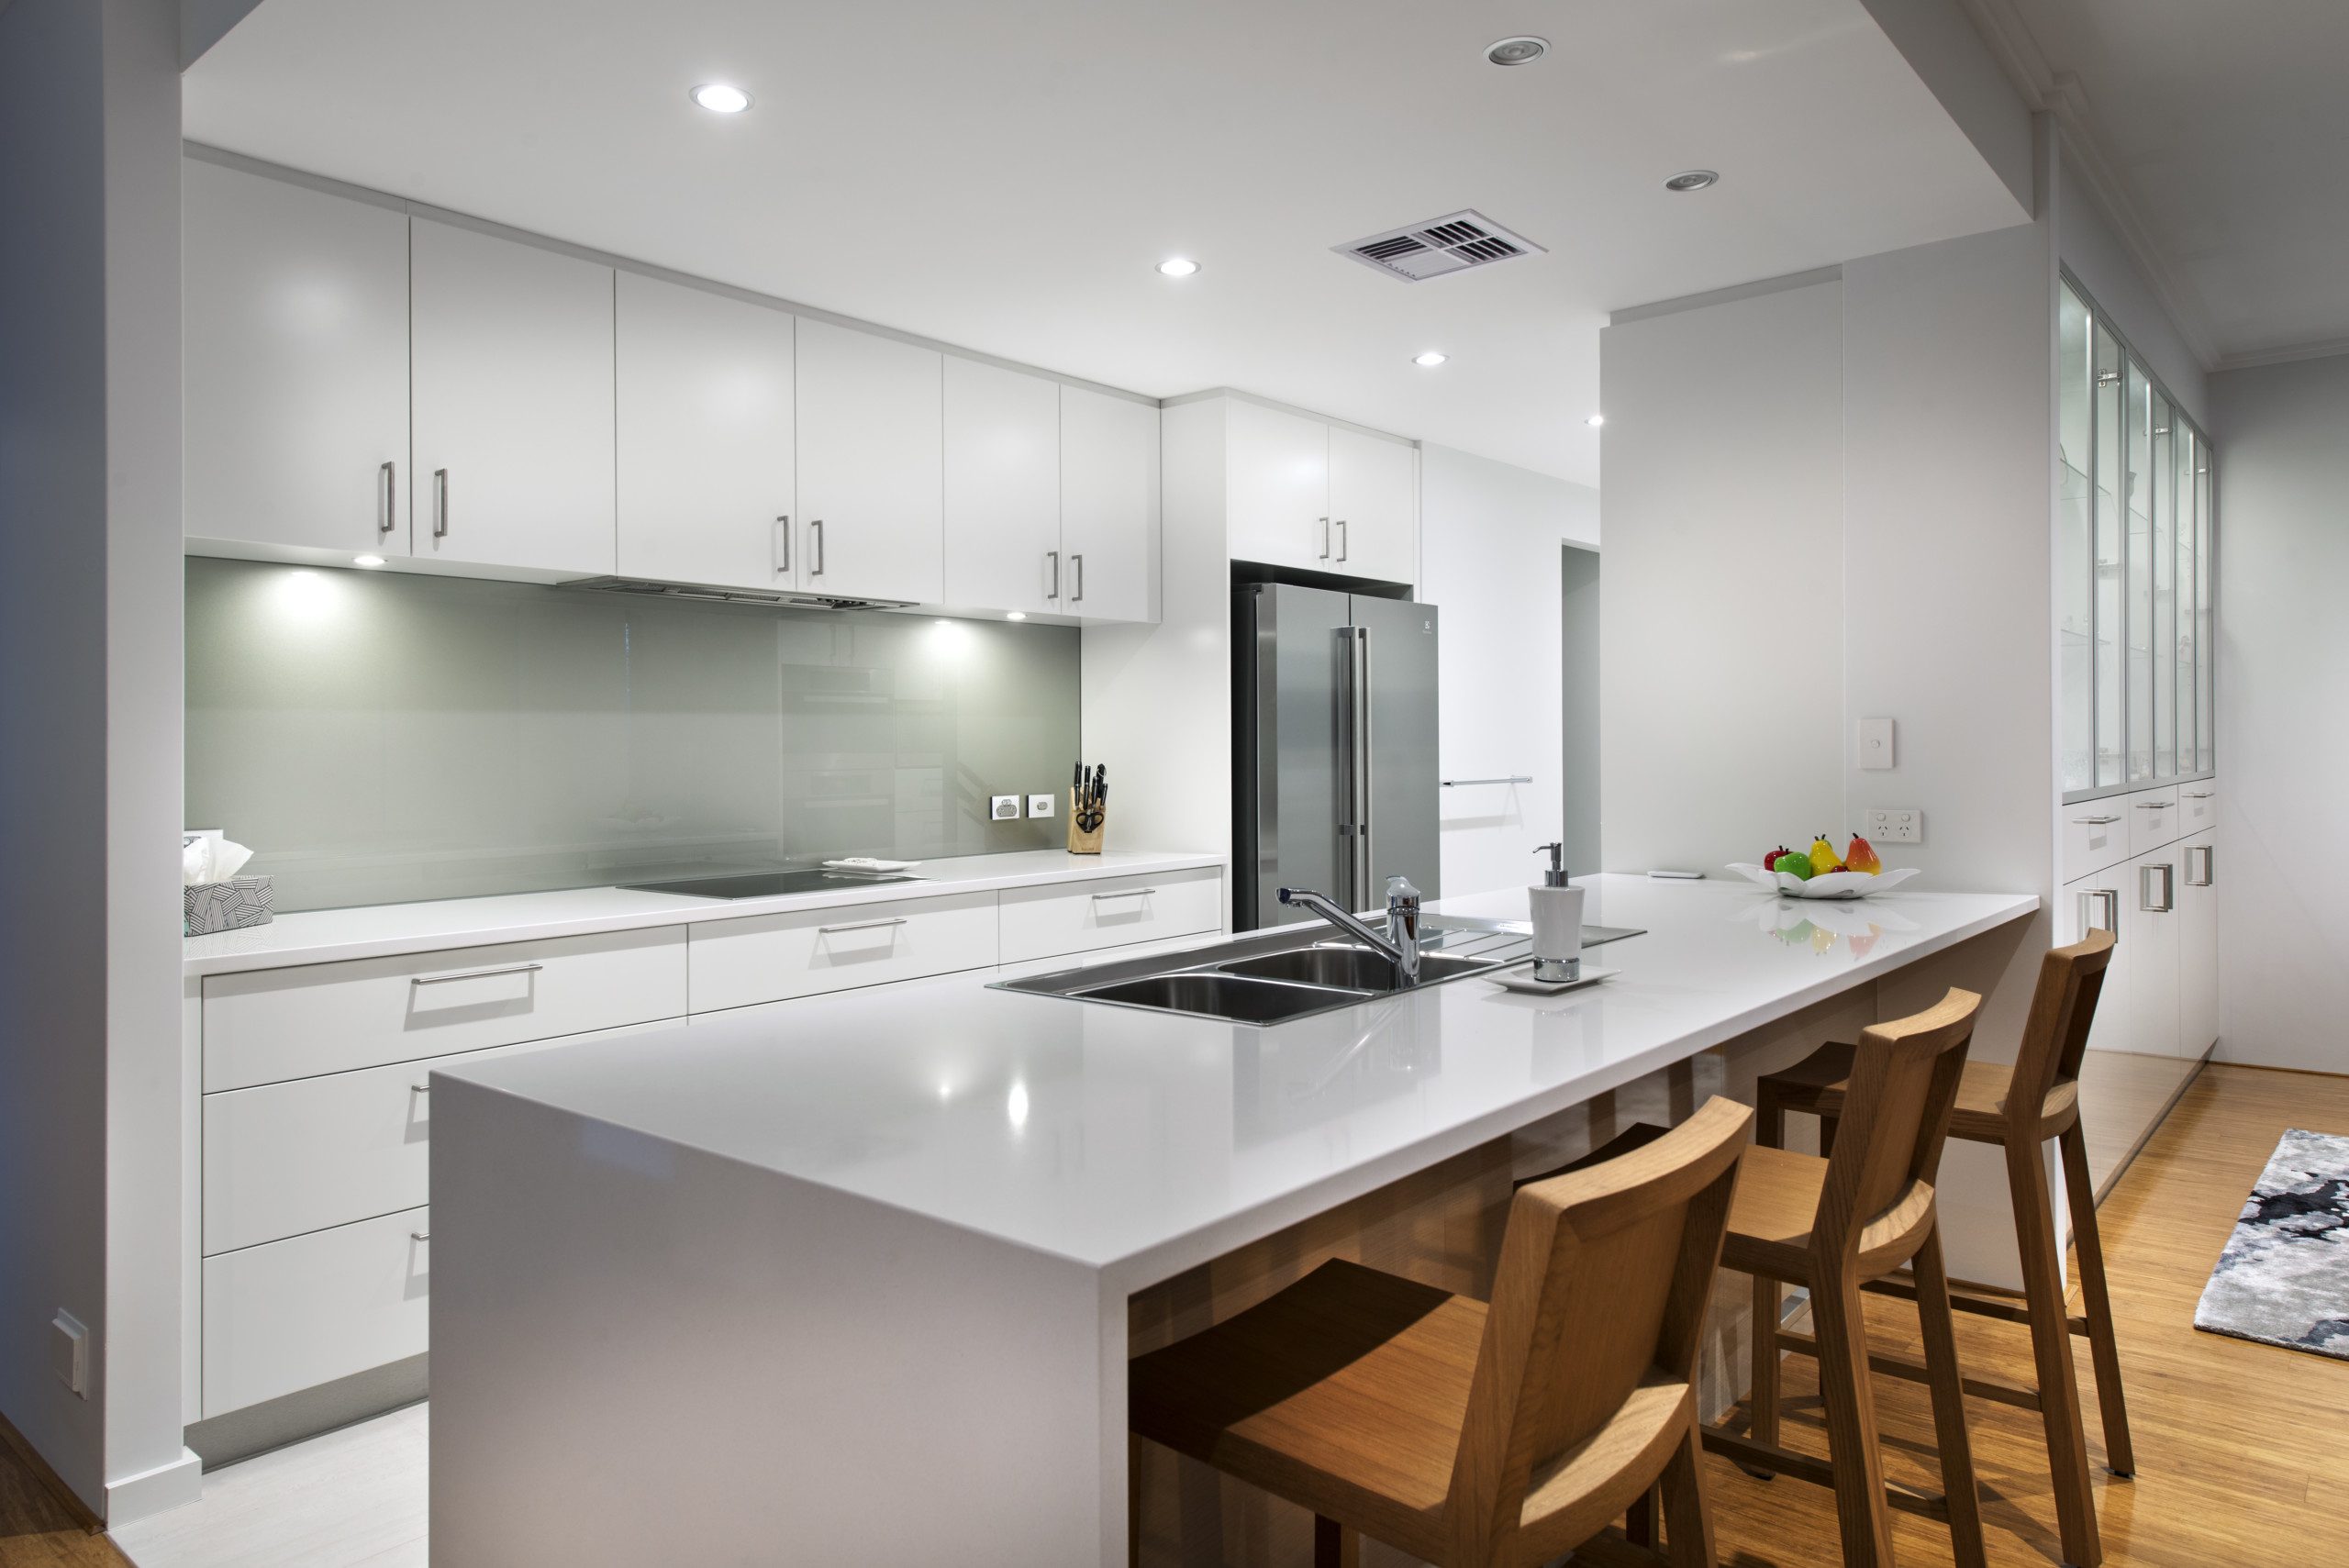 Gloss Or Matte Cabinet Finish - Kitchen Design and Renovations Perth